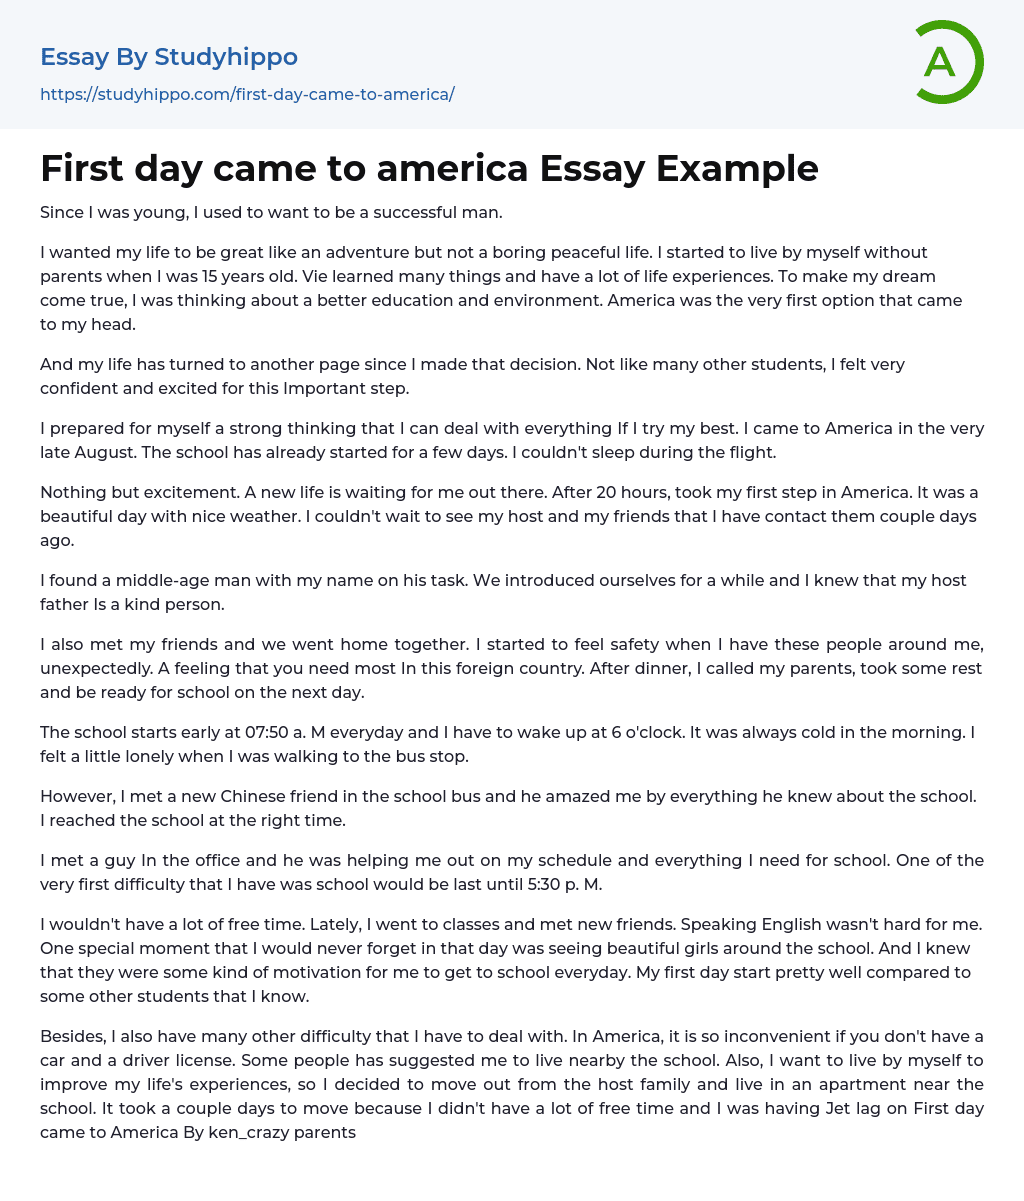 First day came to america Essay Example